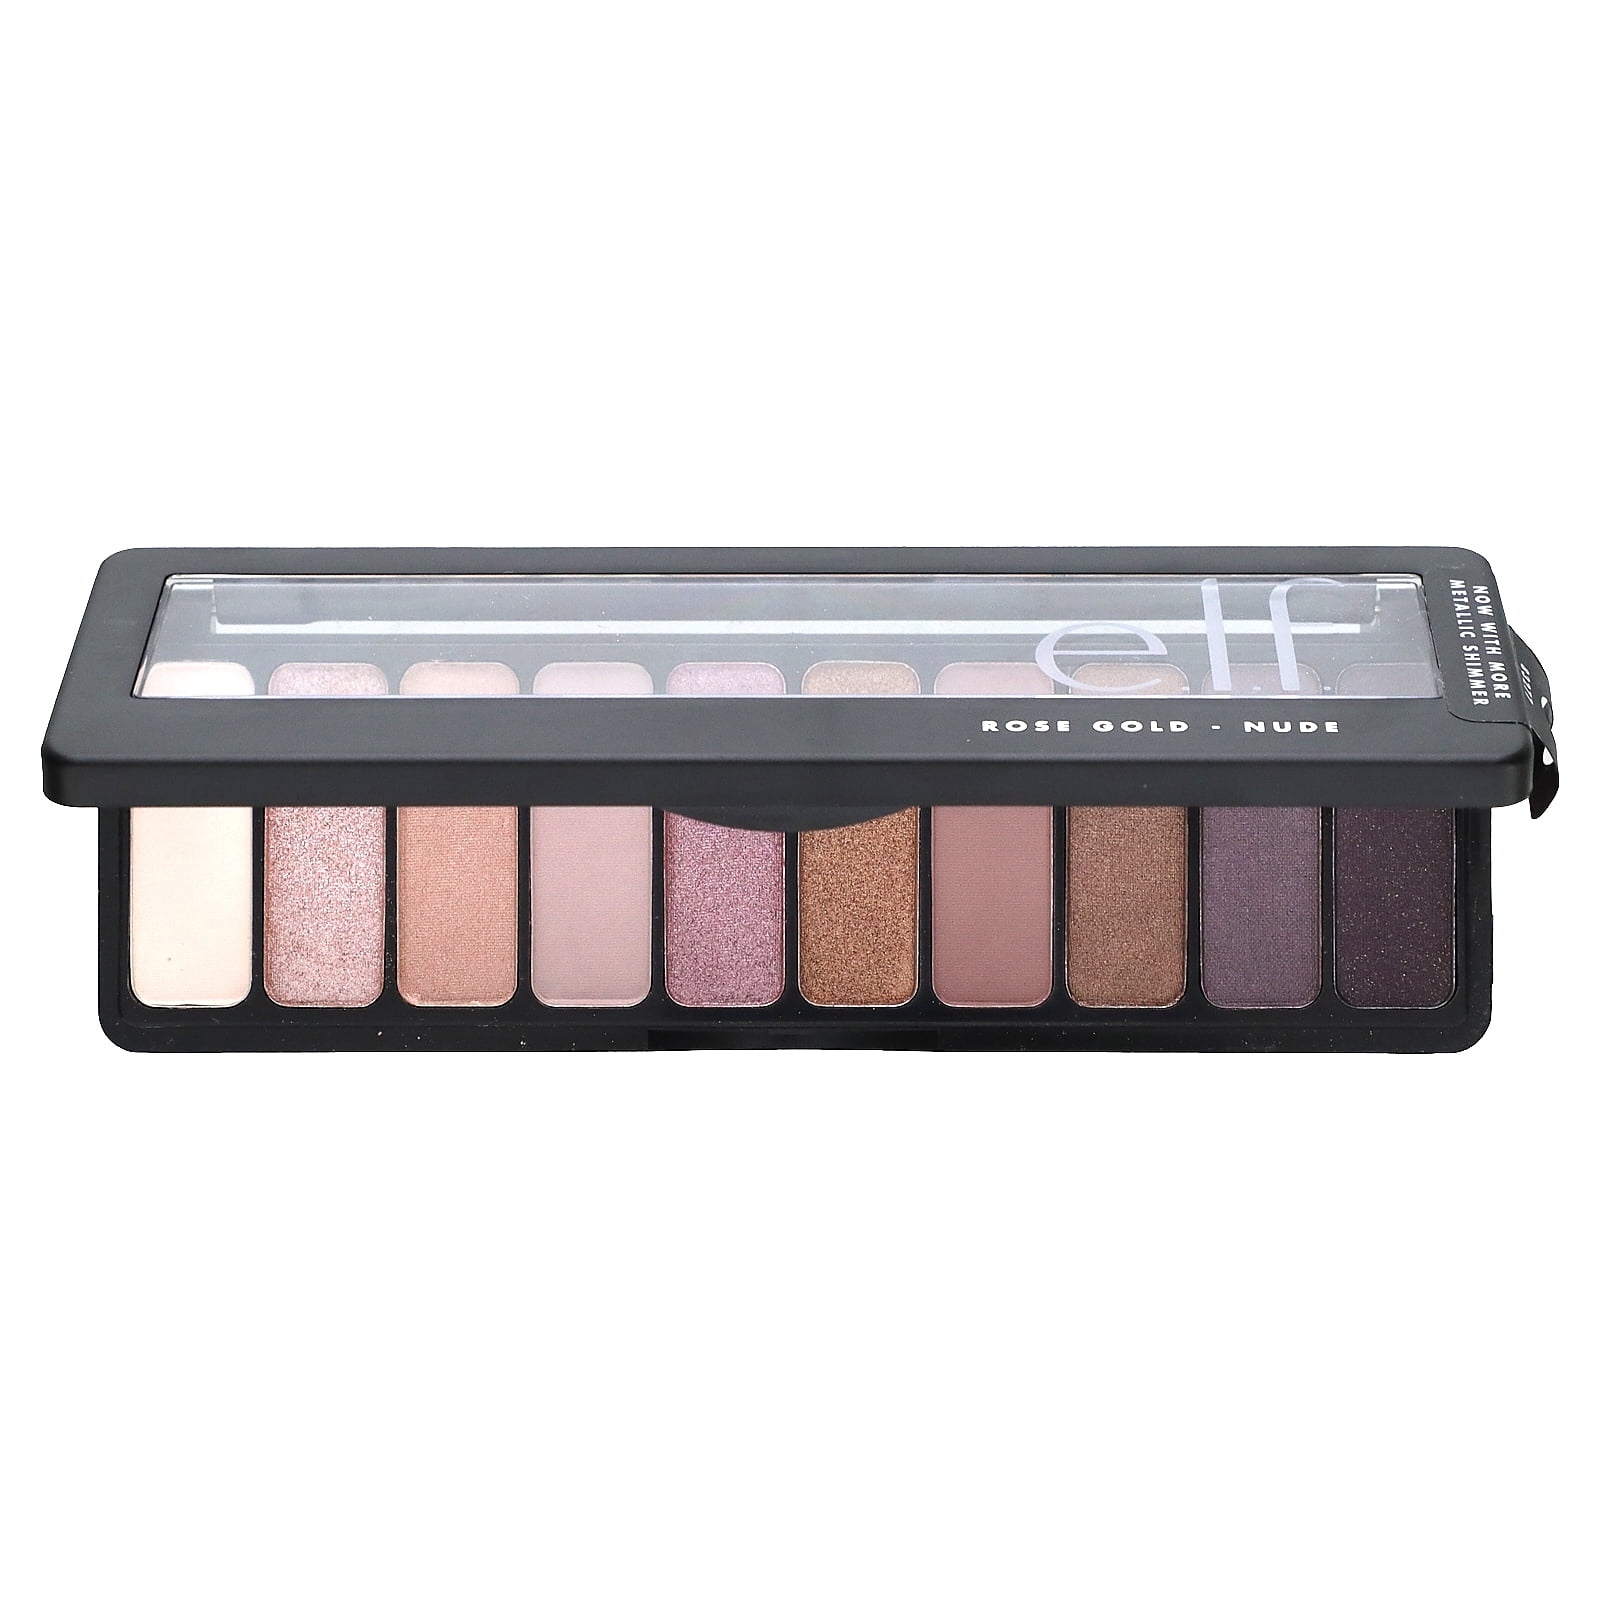 Cosmetics Eyeshadow Rose Gold e.l.f. Nude Palette,